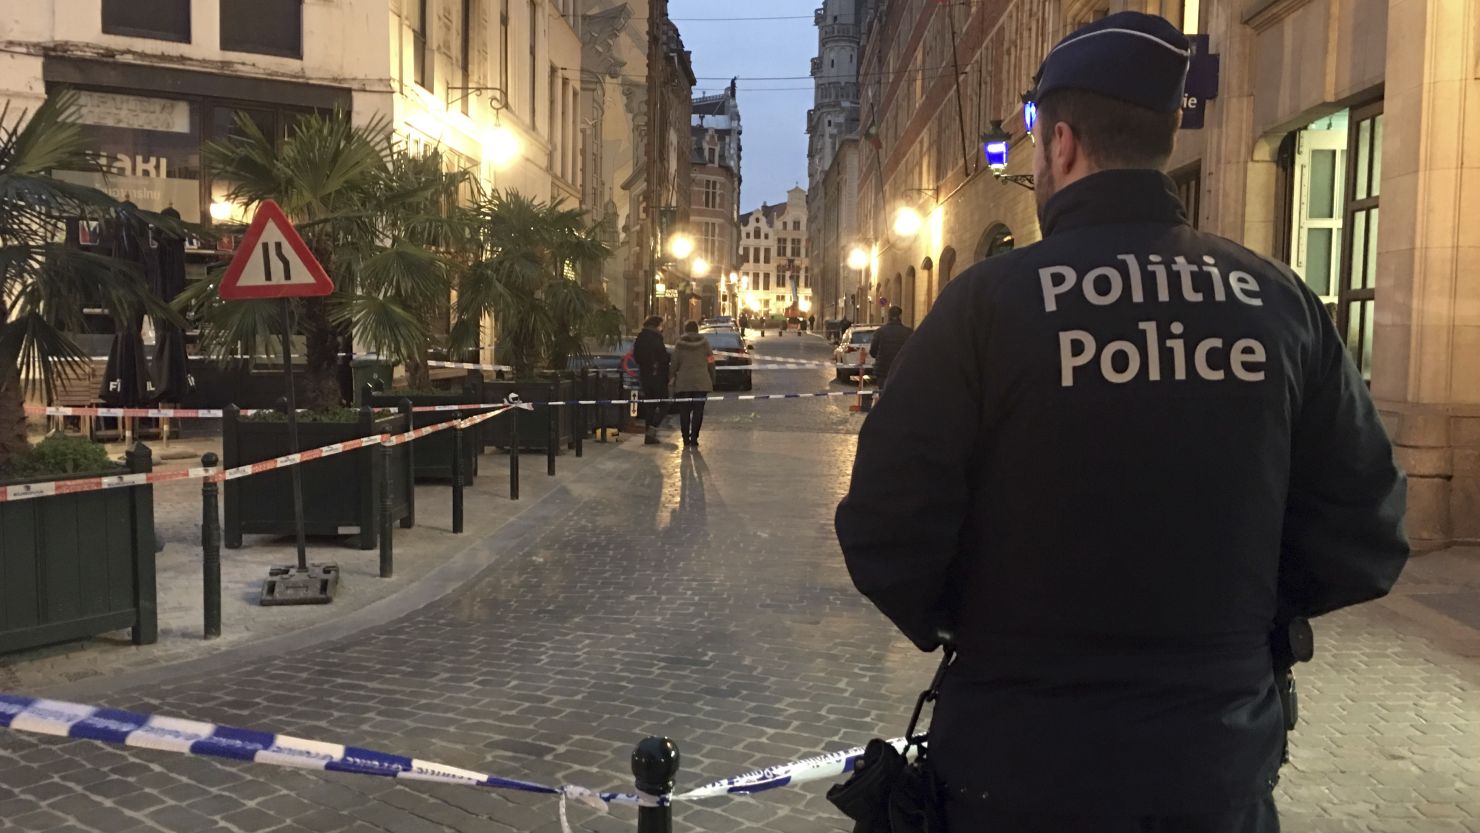 A police officer stands behind a police tape during investigations at a stabbing scene in the center of Brussels on Tuesday.